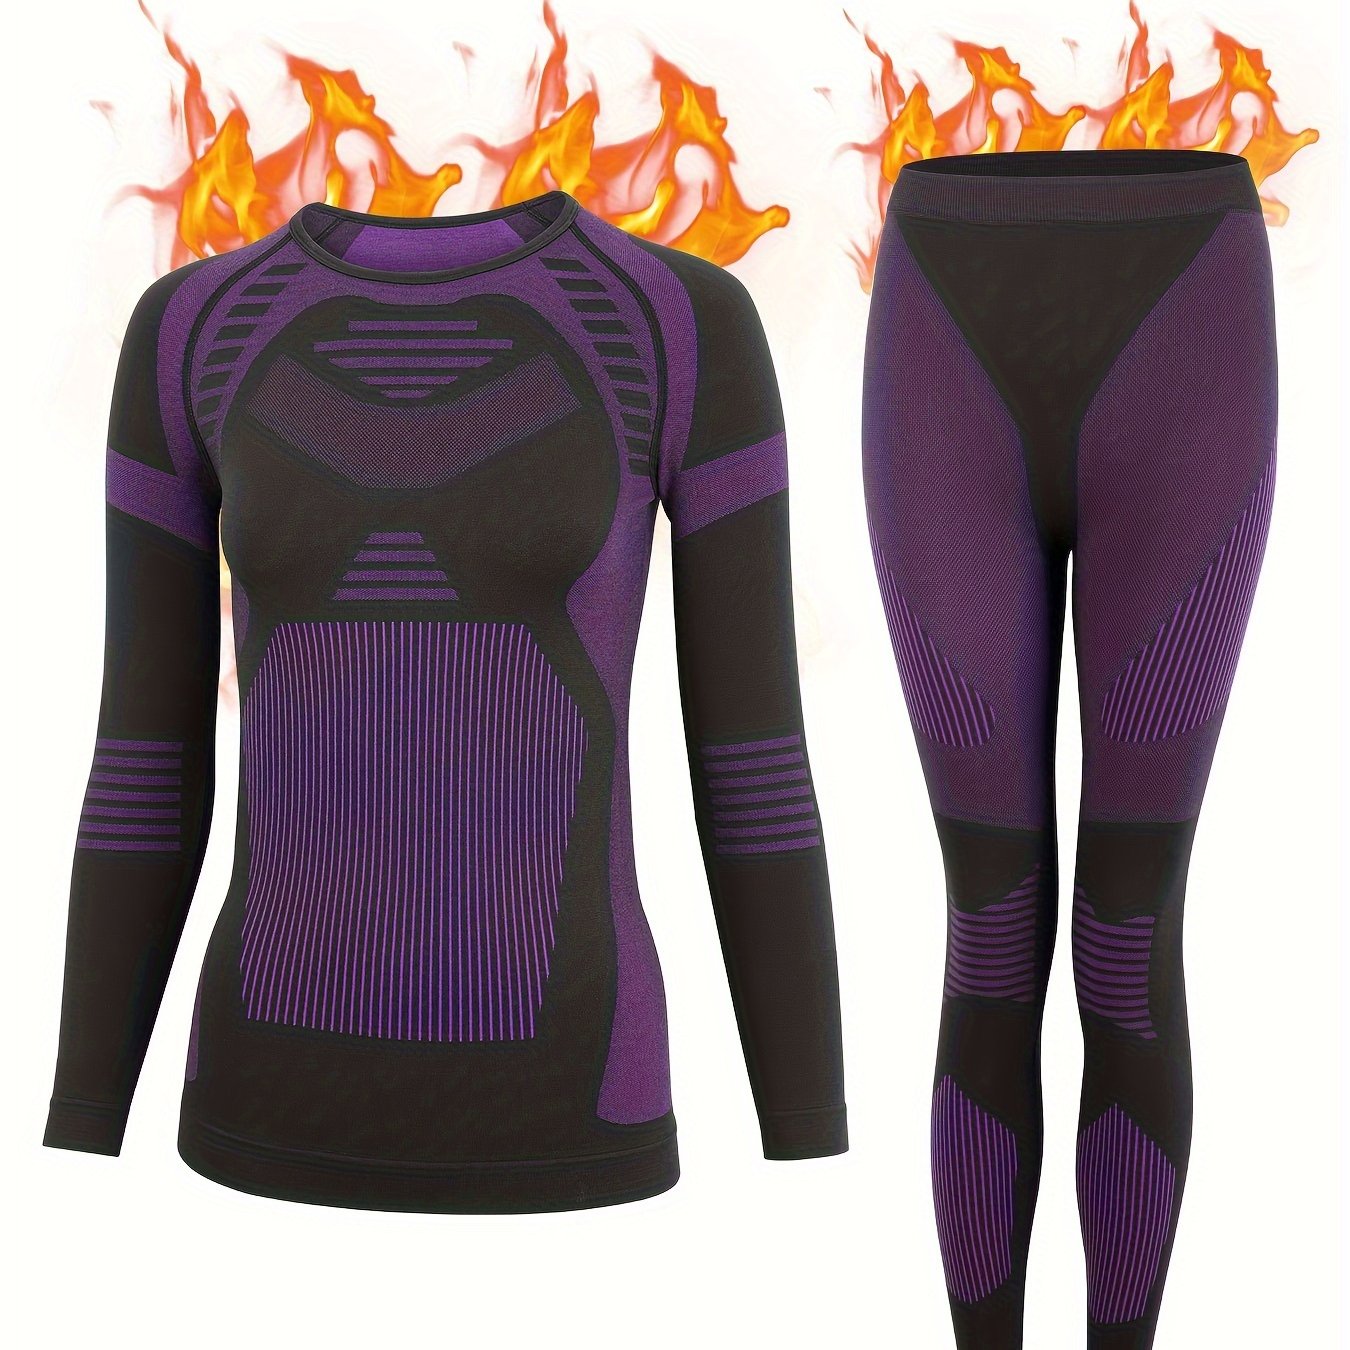 Glonme Womens Thermal Sets Ultra-Soft Long Sleeve Set Base Layer Skiing  Winter Warm Top & Bottom for Skiing Running Women Purple XL